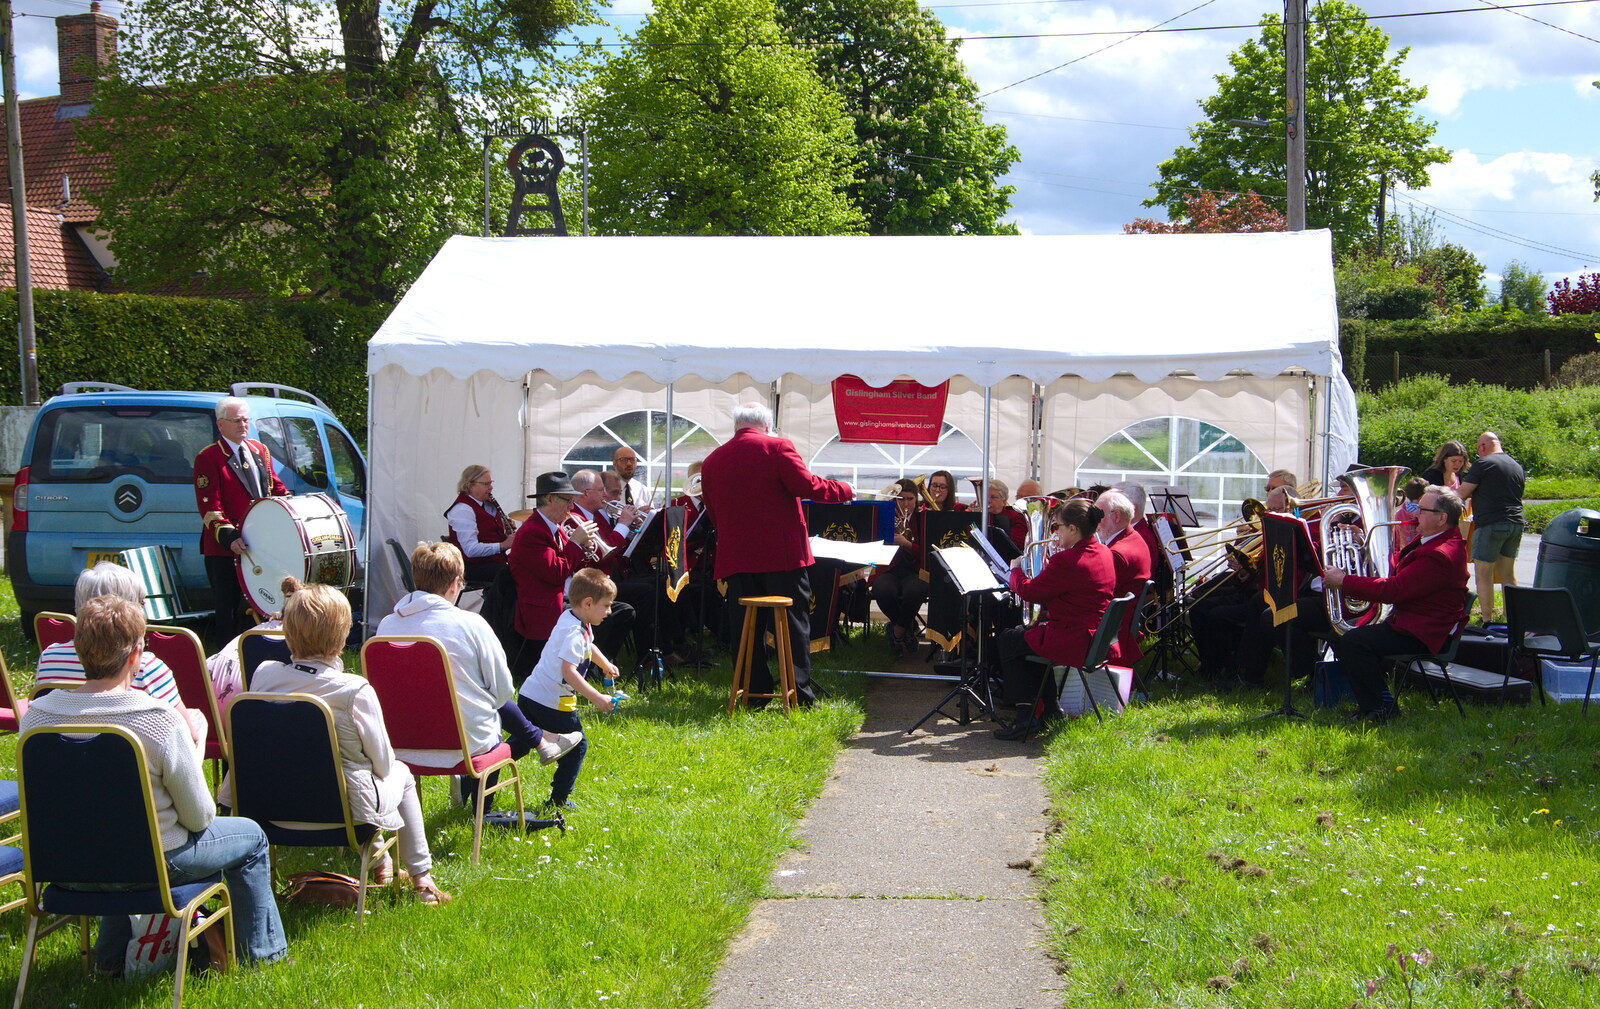 The Silver Band does its thing in a marquee from The Gislingham Silver Band at the Village Hall, Gislingham, Suffolk - 12th May 2019